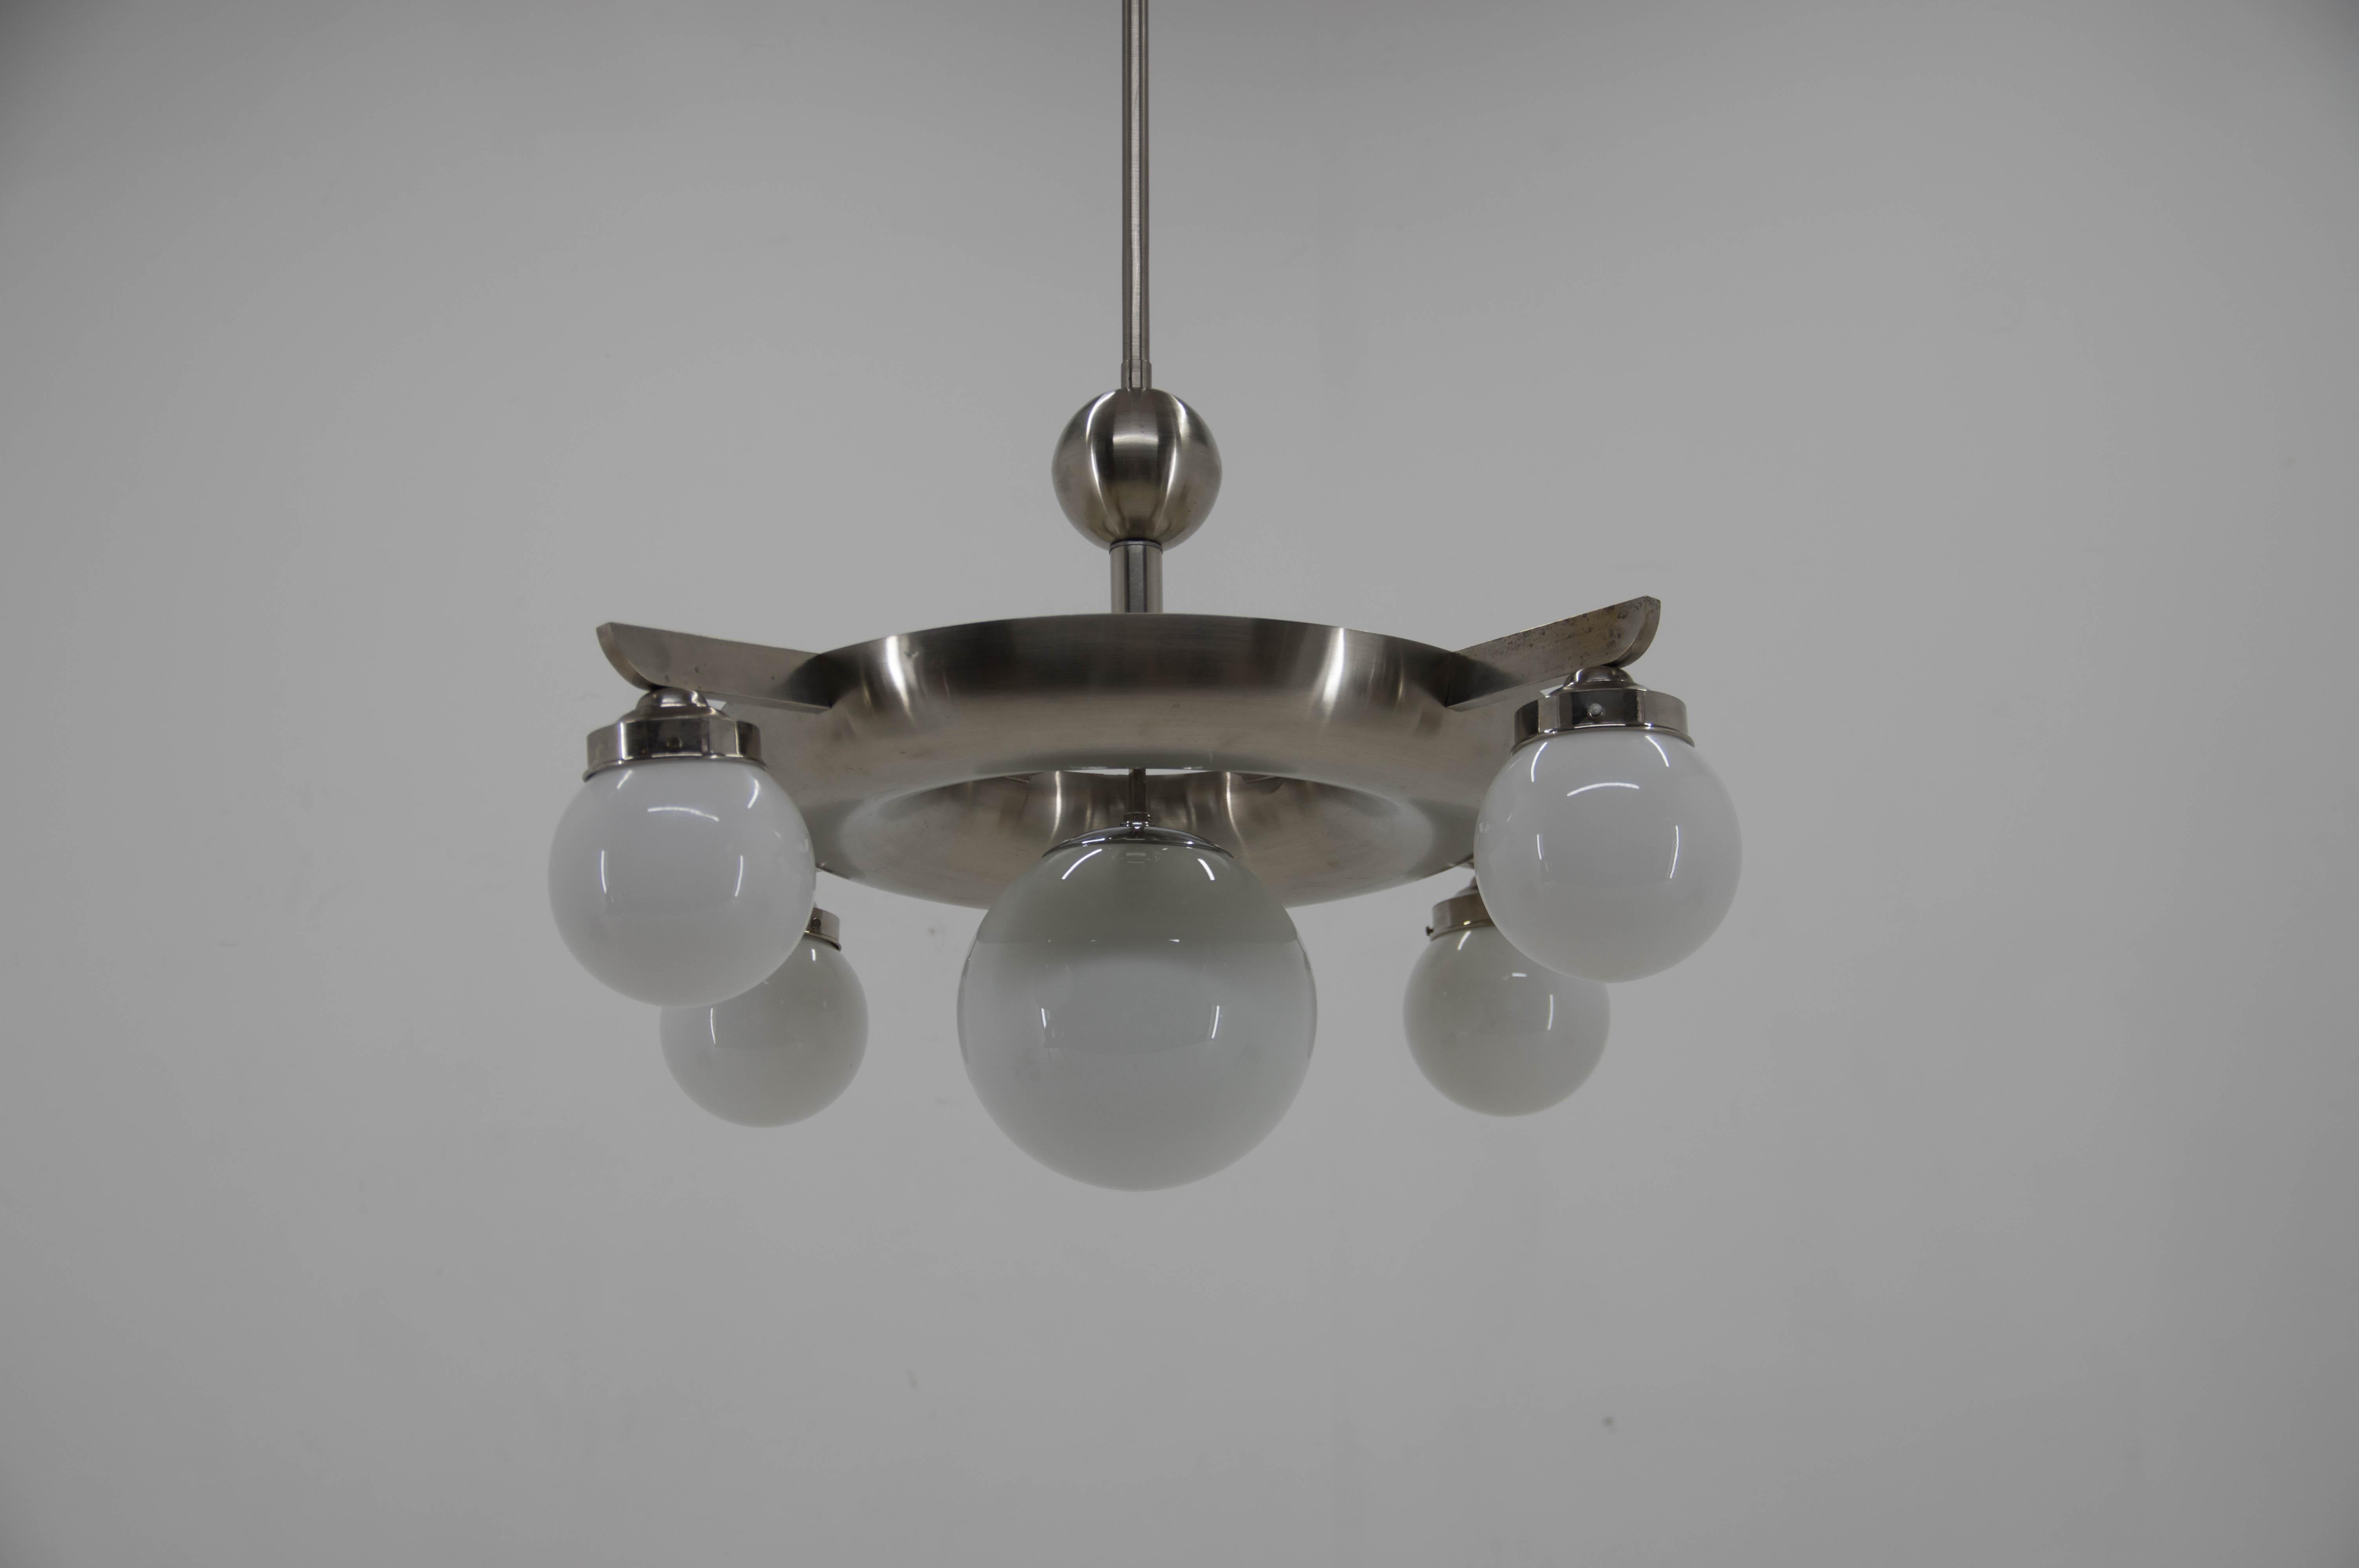 Czech Rare Functionalism or Bauhaus Chandelier by IAS, 1920s For Sale